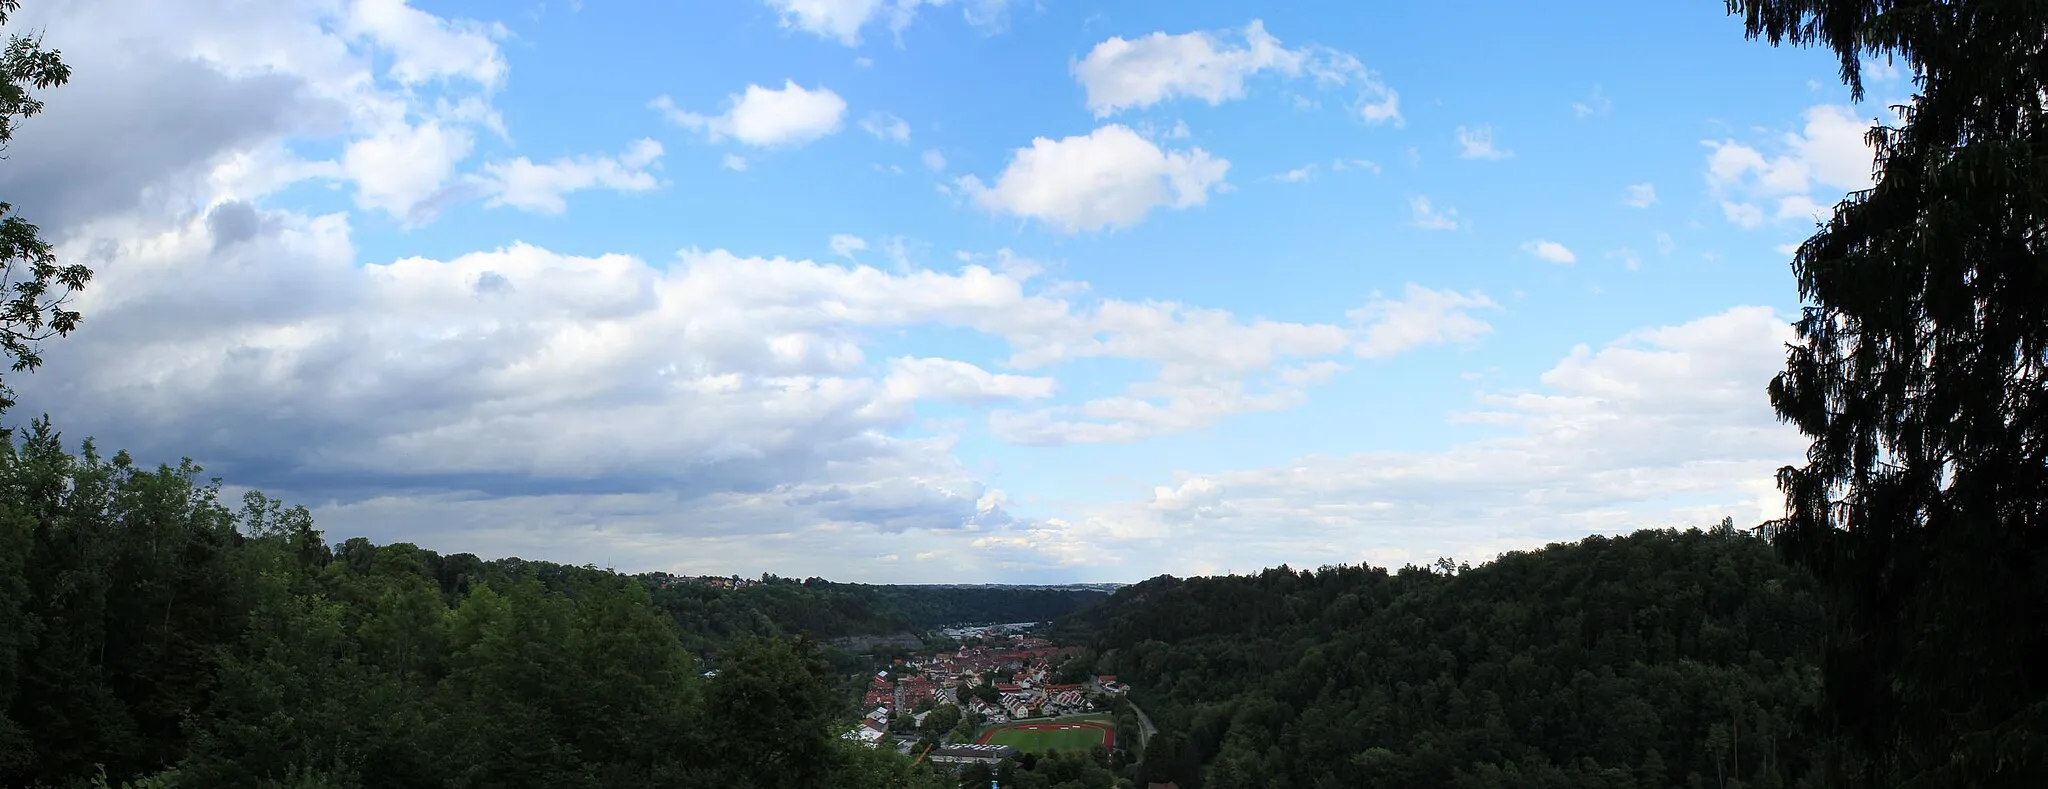 Photo showing: A panorama picture of Sulz am Neckar